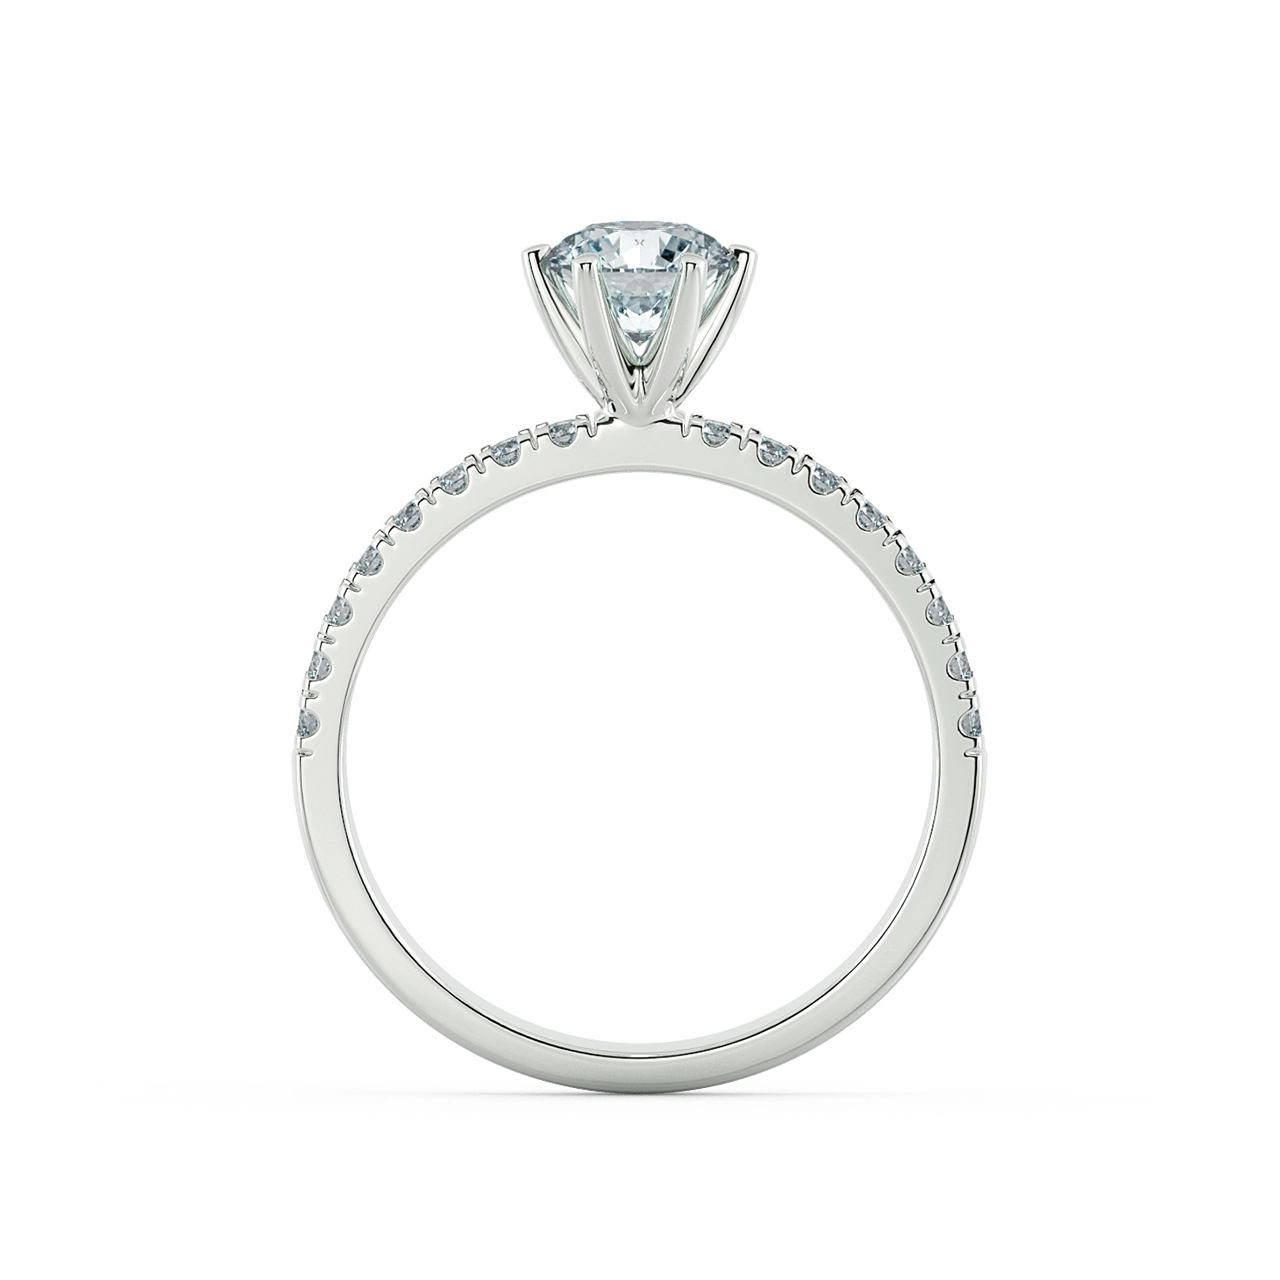 Six Prongs Solitaire Pave Engagement Ring NCH1203 5